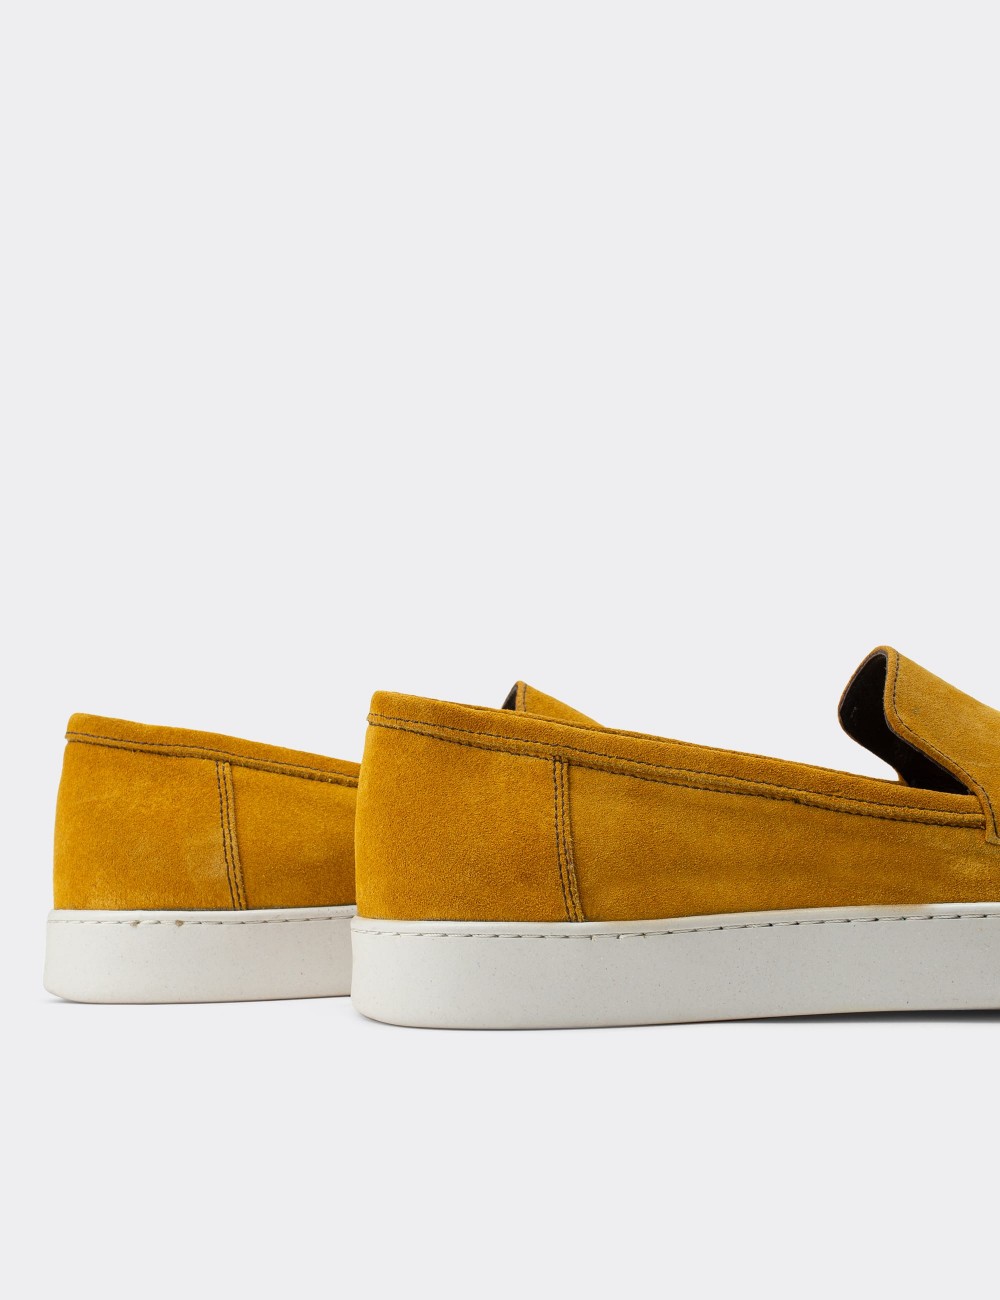 Yellow Suede Leather Loafers - 01865MSRIC01